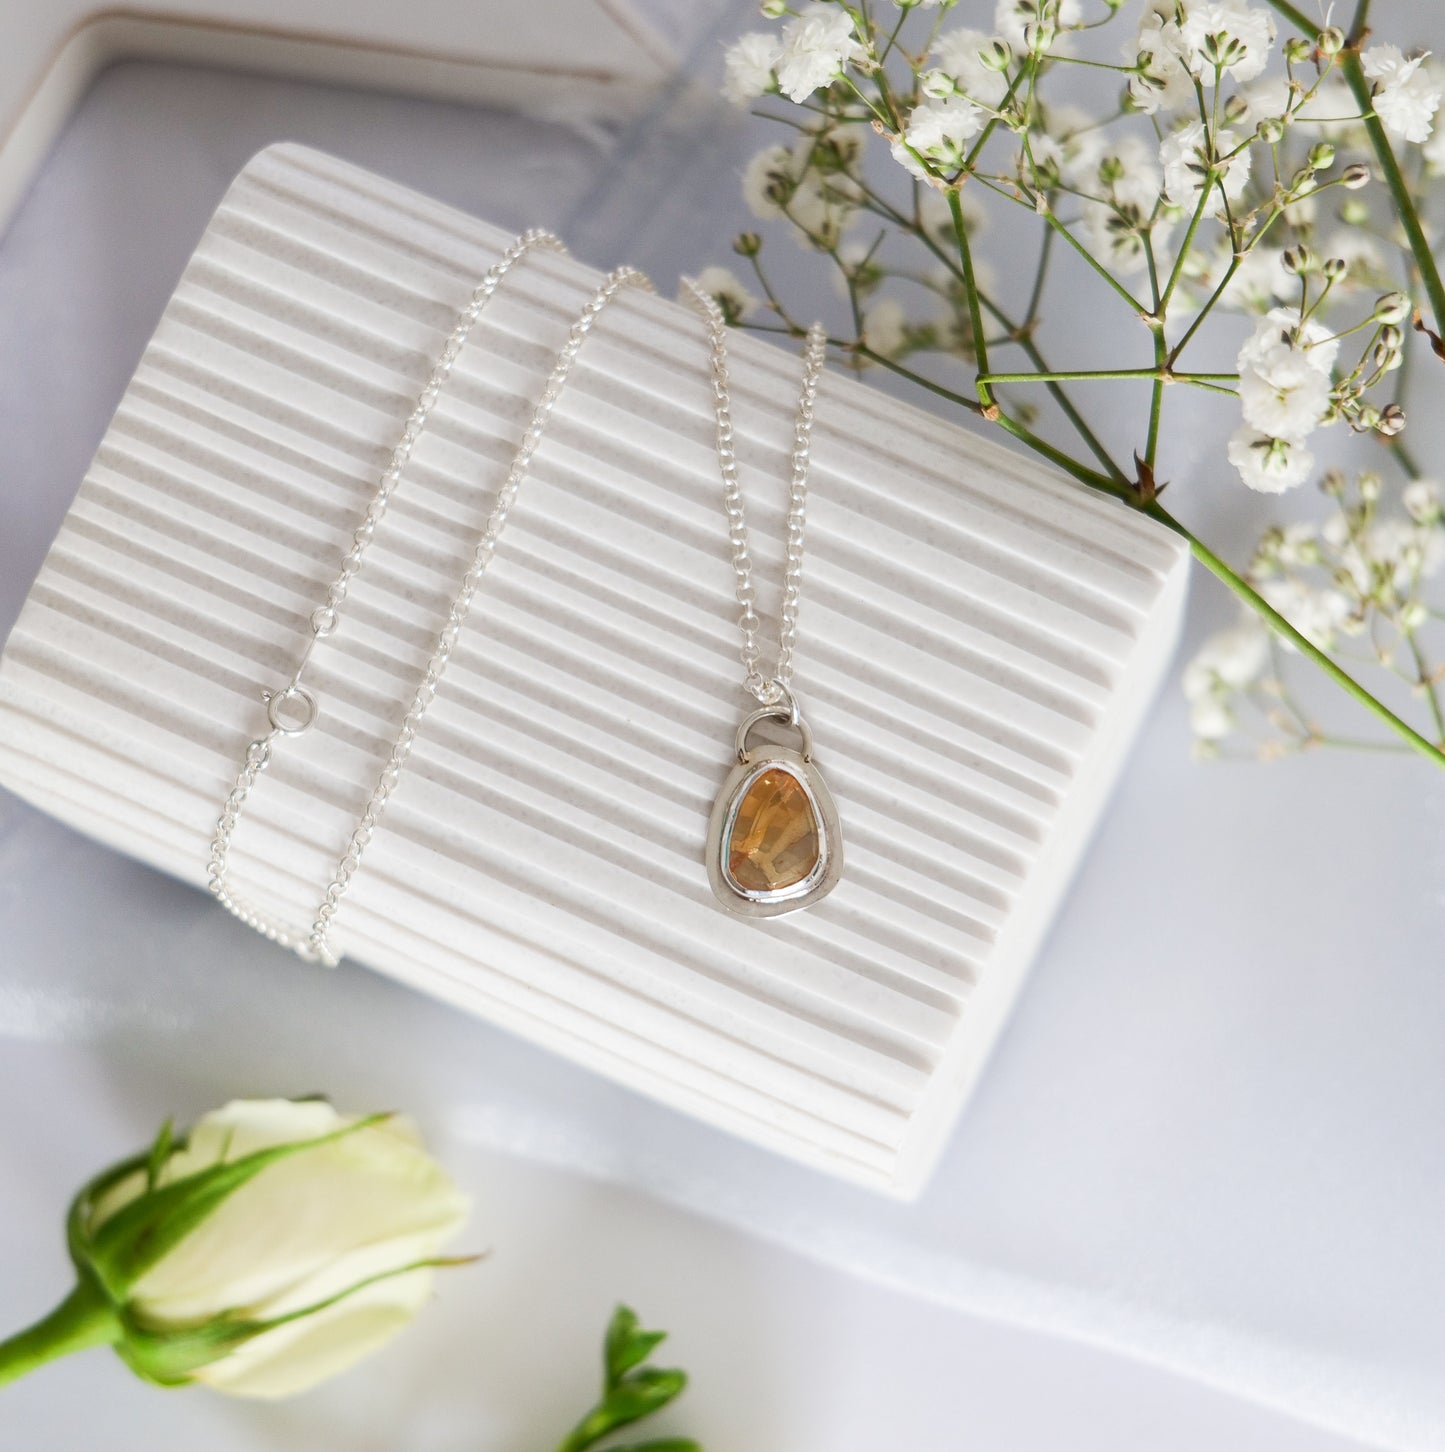 Load image into Gallery viewer, Citrine Sunbeam Necklace
